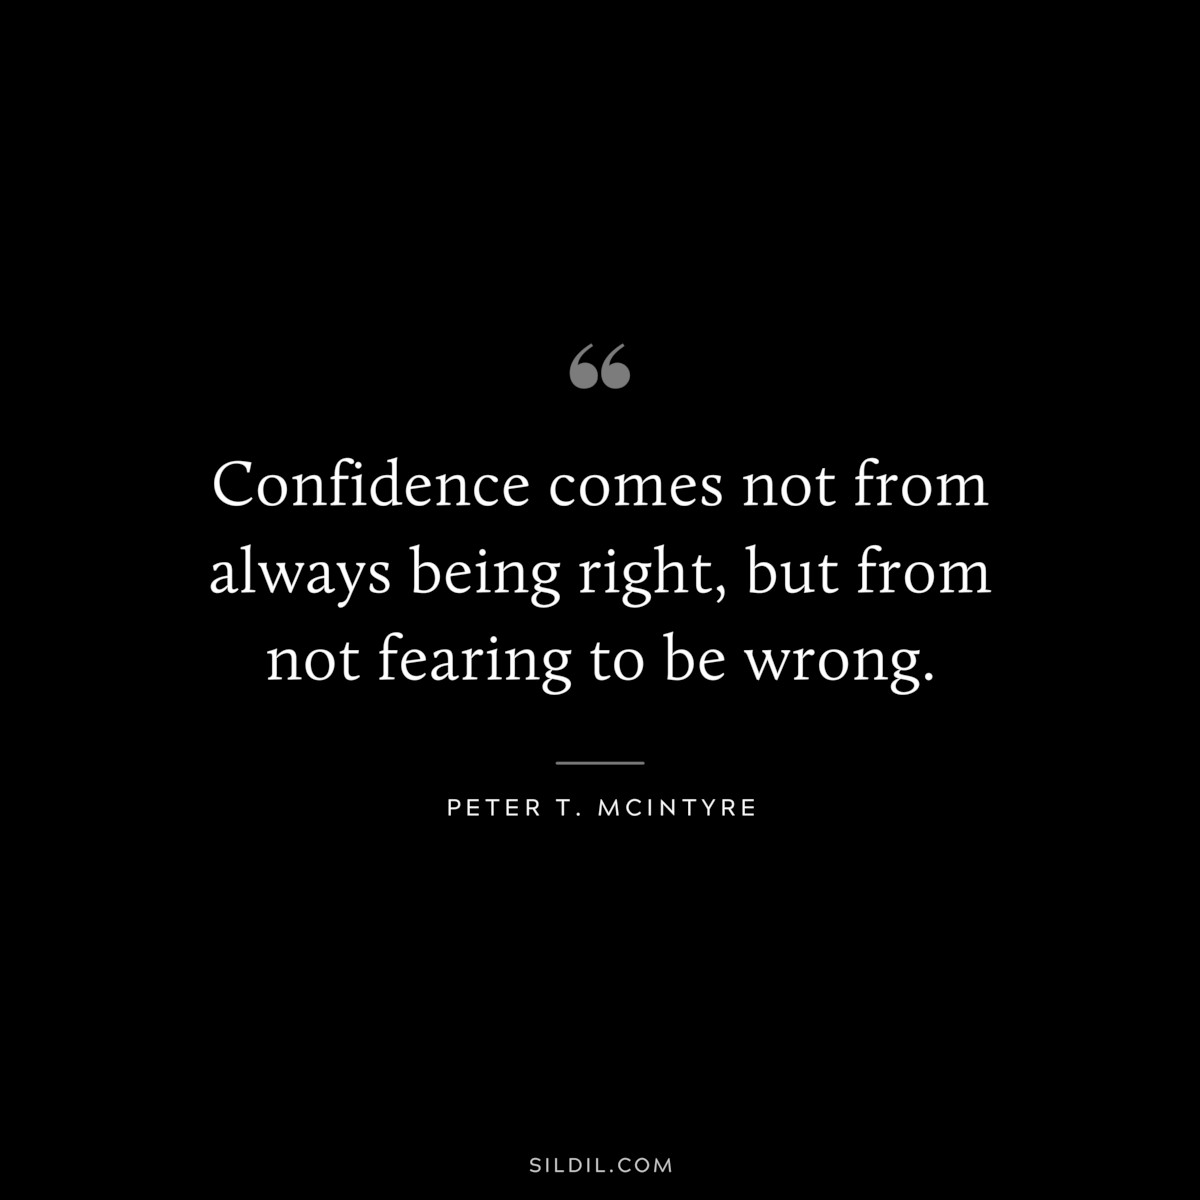 Confidence comes not from always being right, but from not fearing to be wrong. ― Peter T. McIntyre